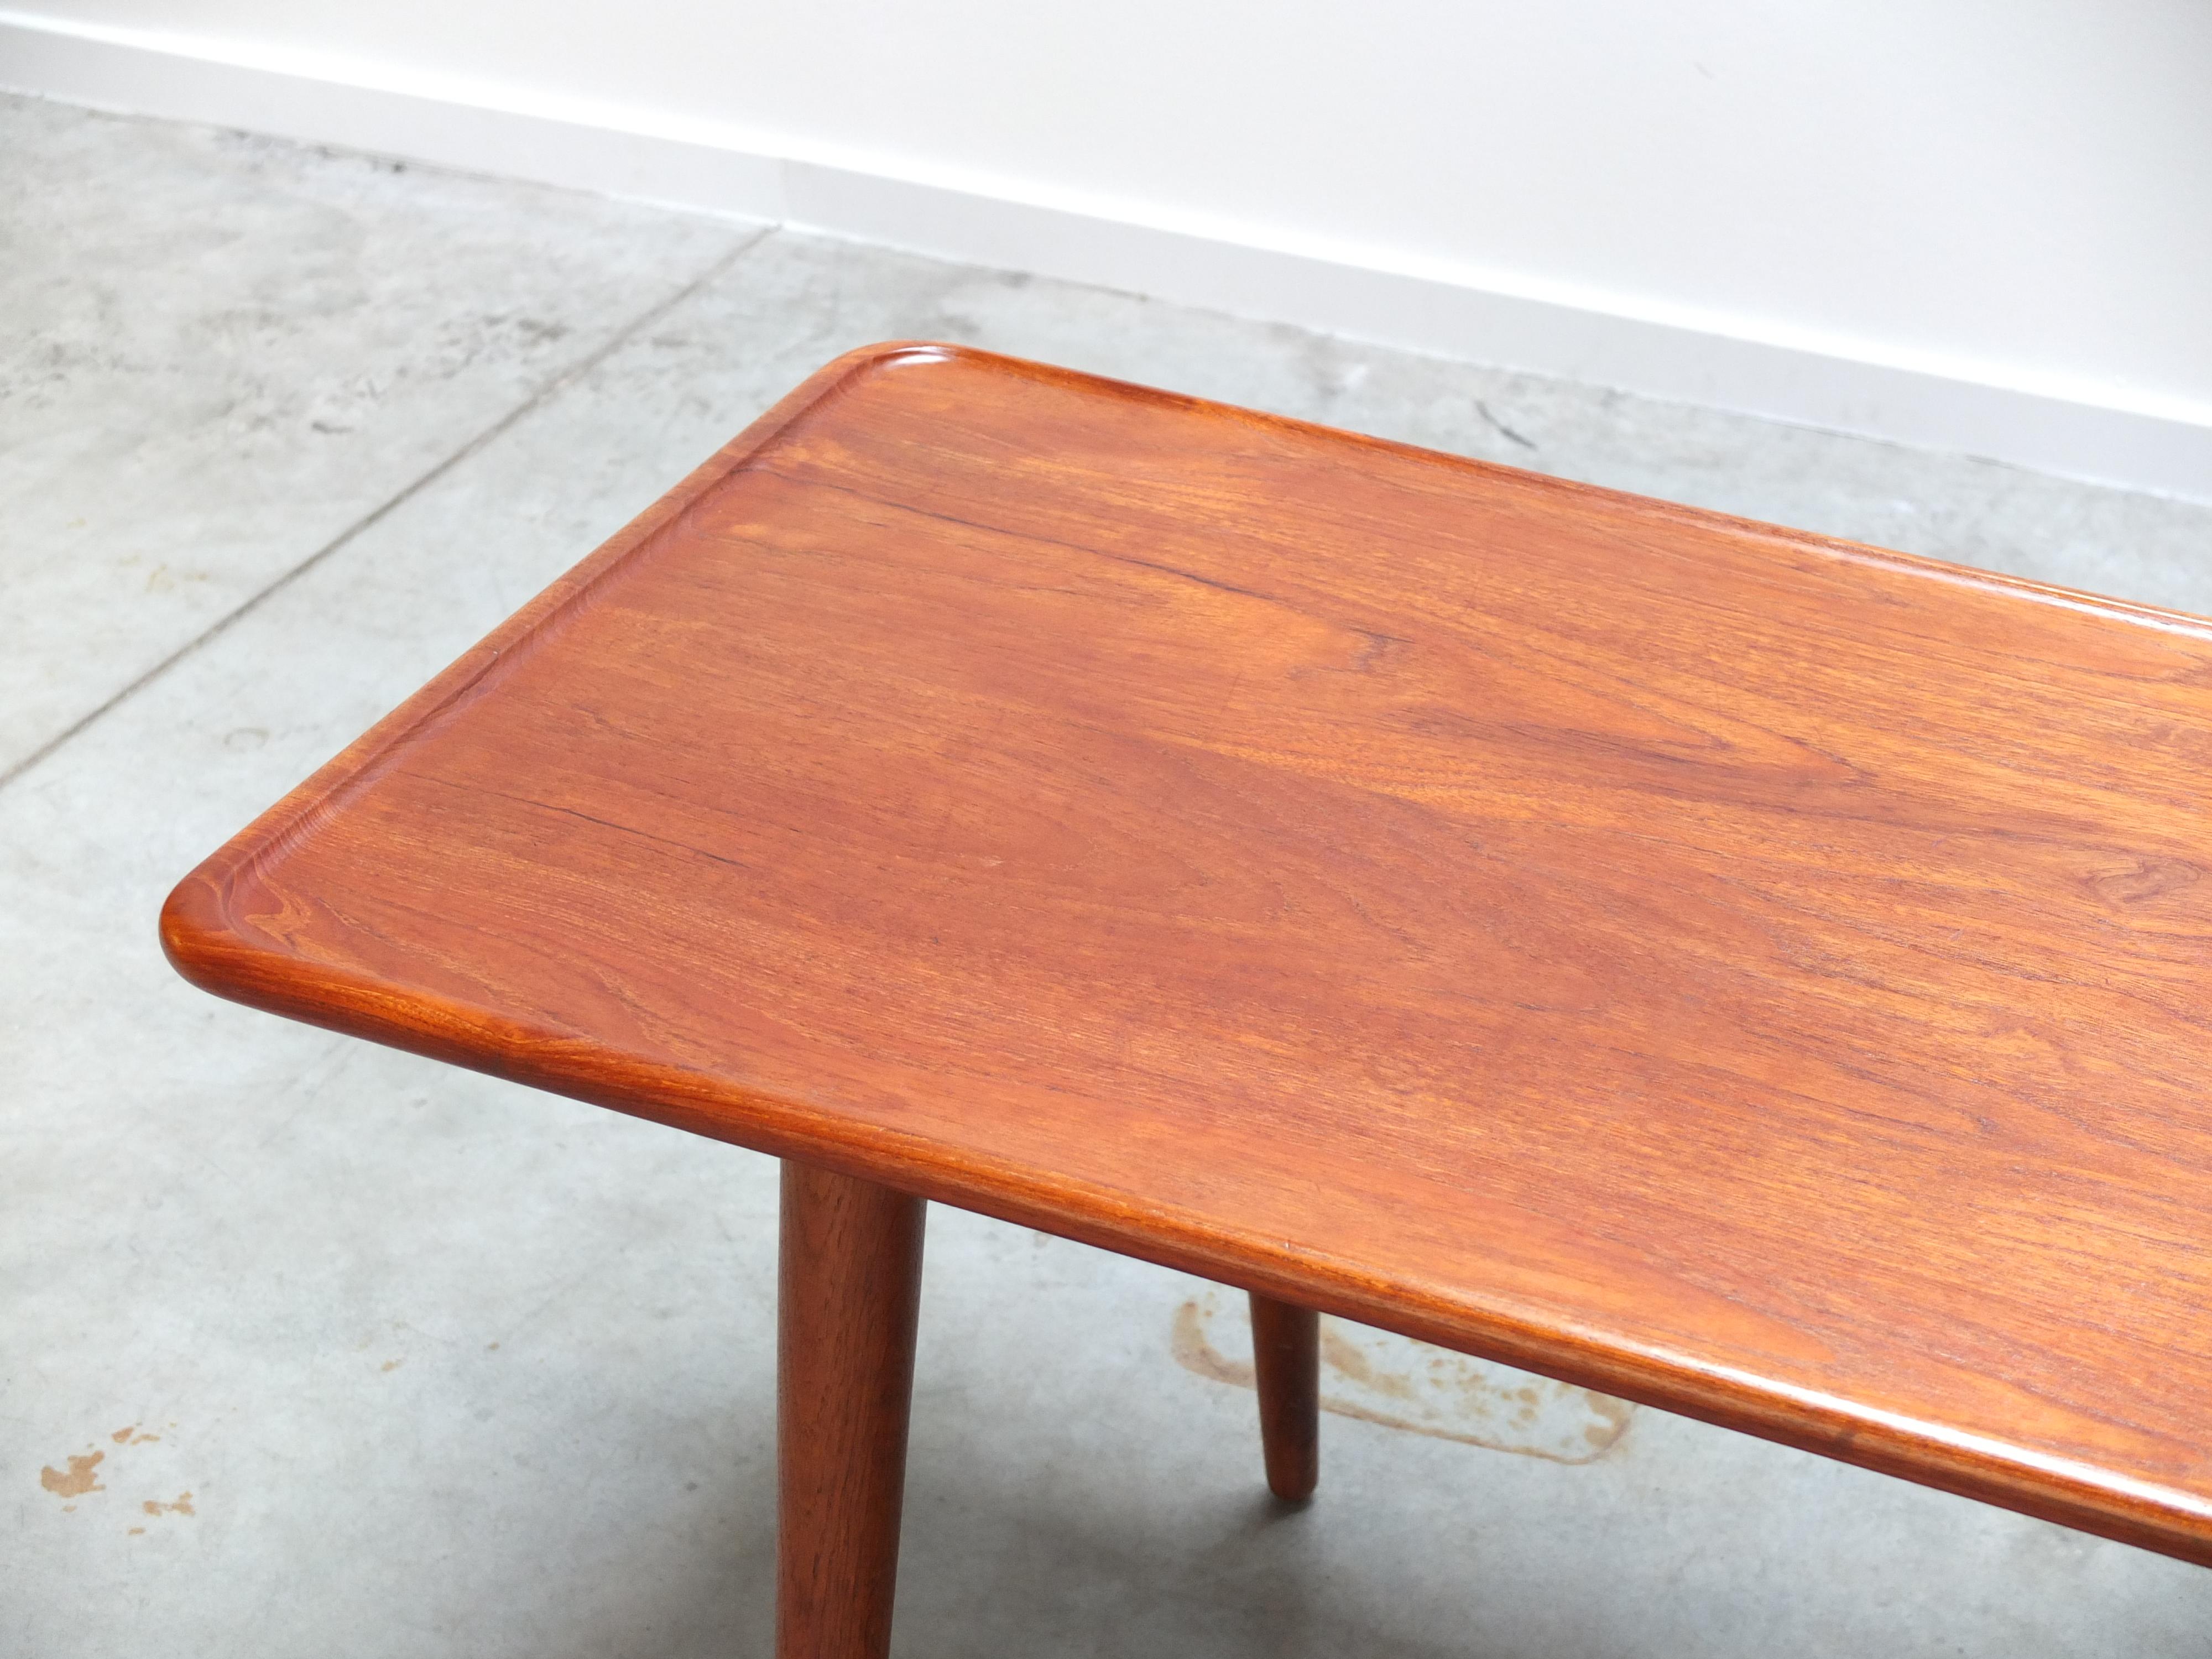 20th Century Teak & Oak 'At-11' Coffee Table by Hans Wegner for Andreas Tuck, 1950s For Sale